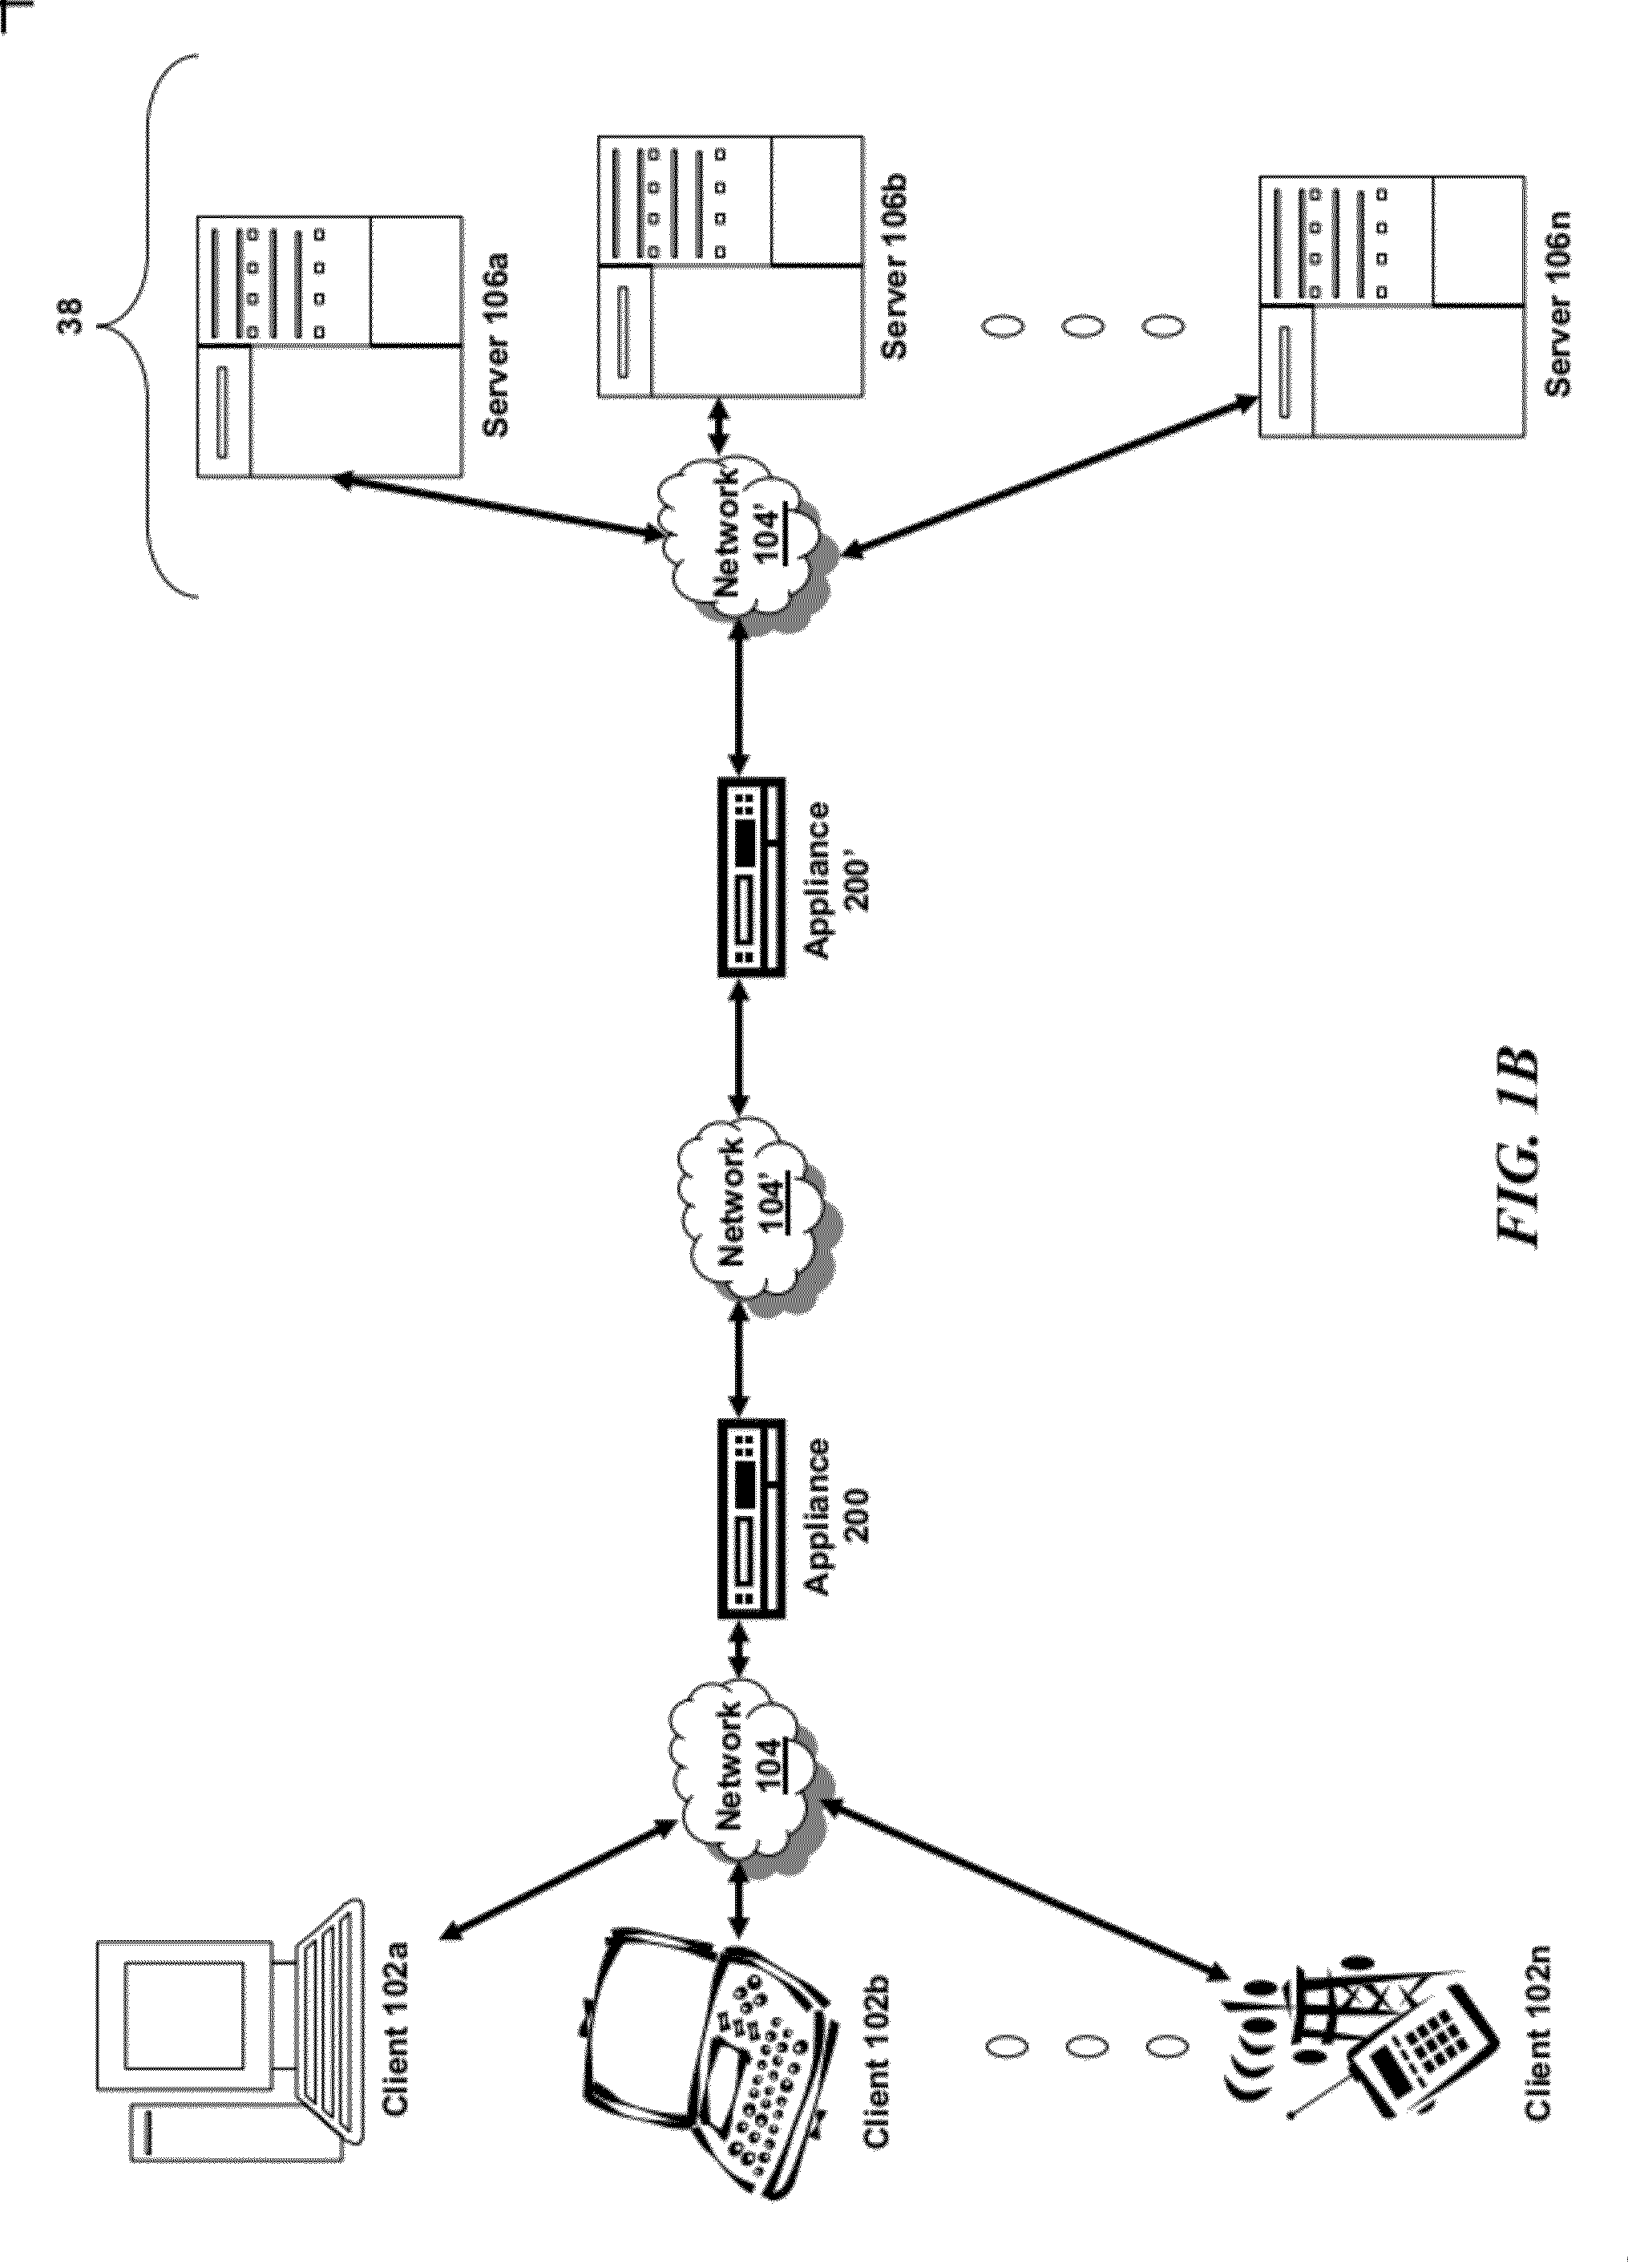 Systems and methods for sr-iov pass-thru via an intermediary device